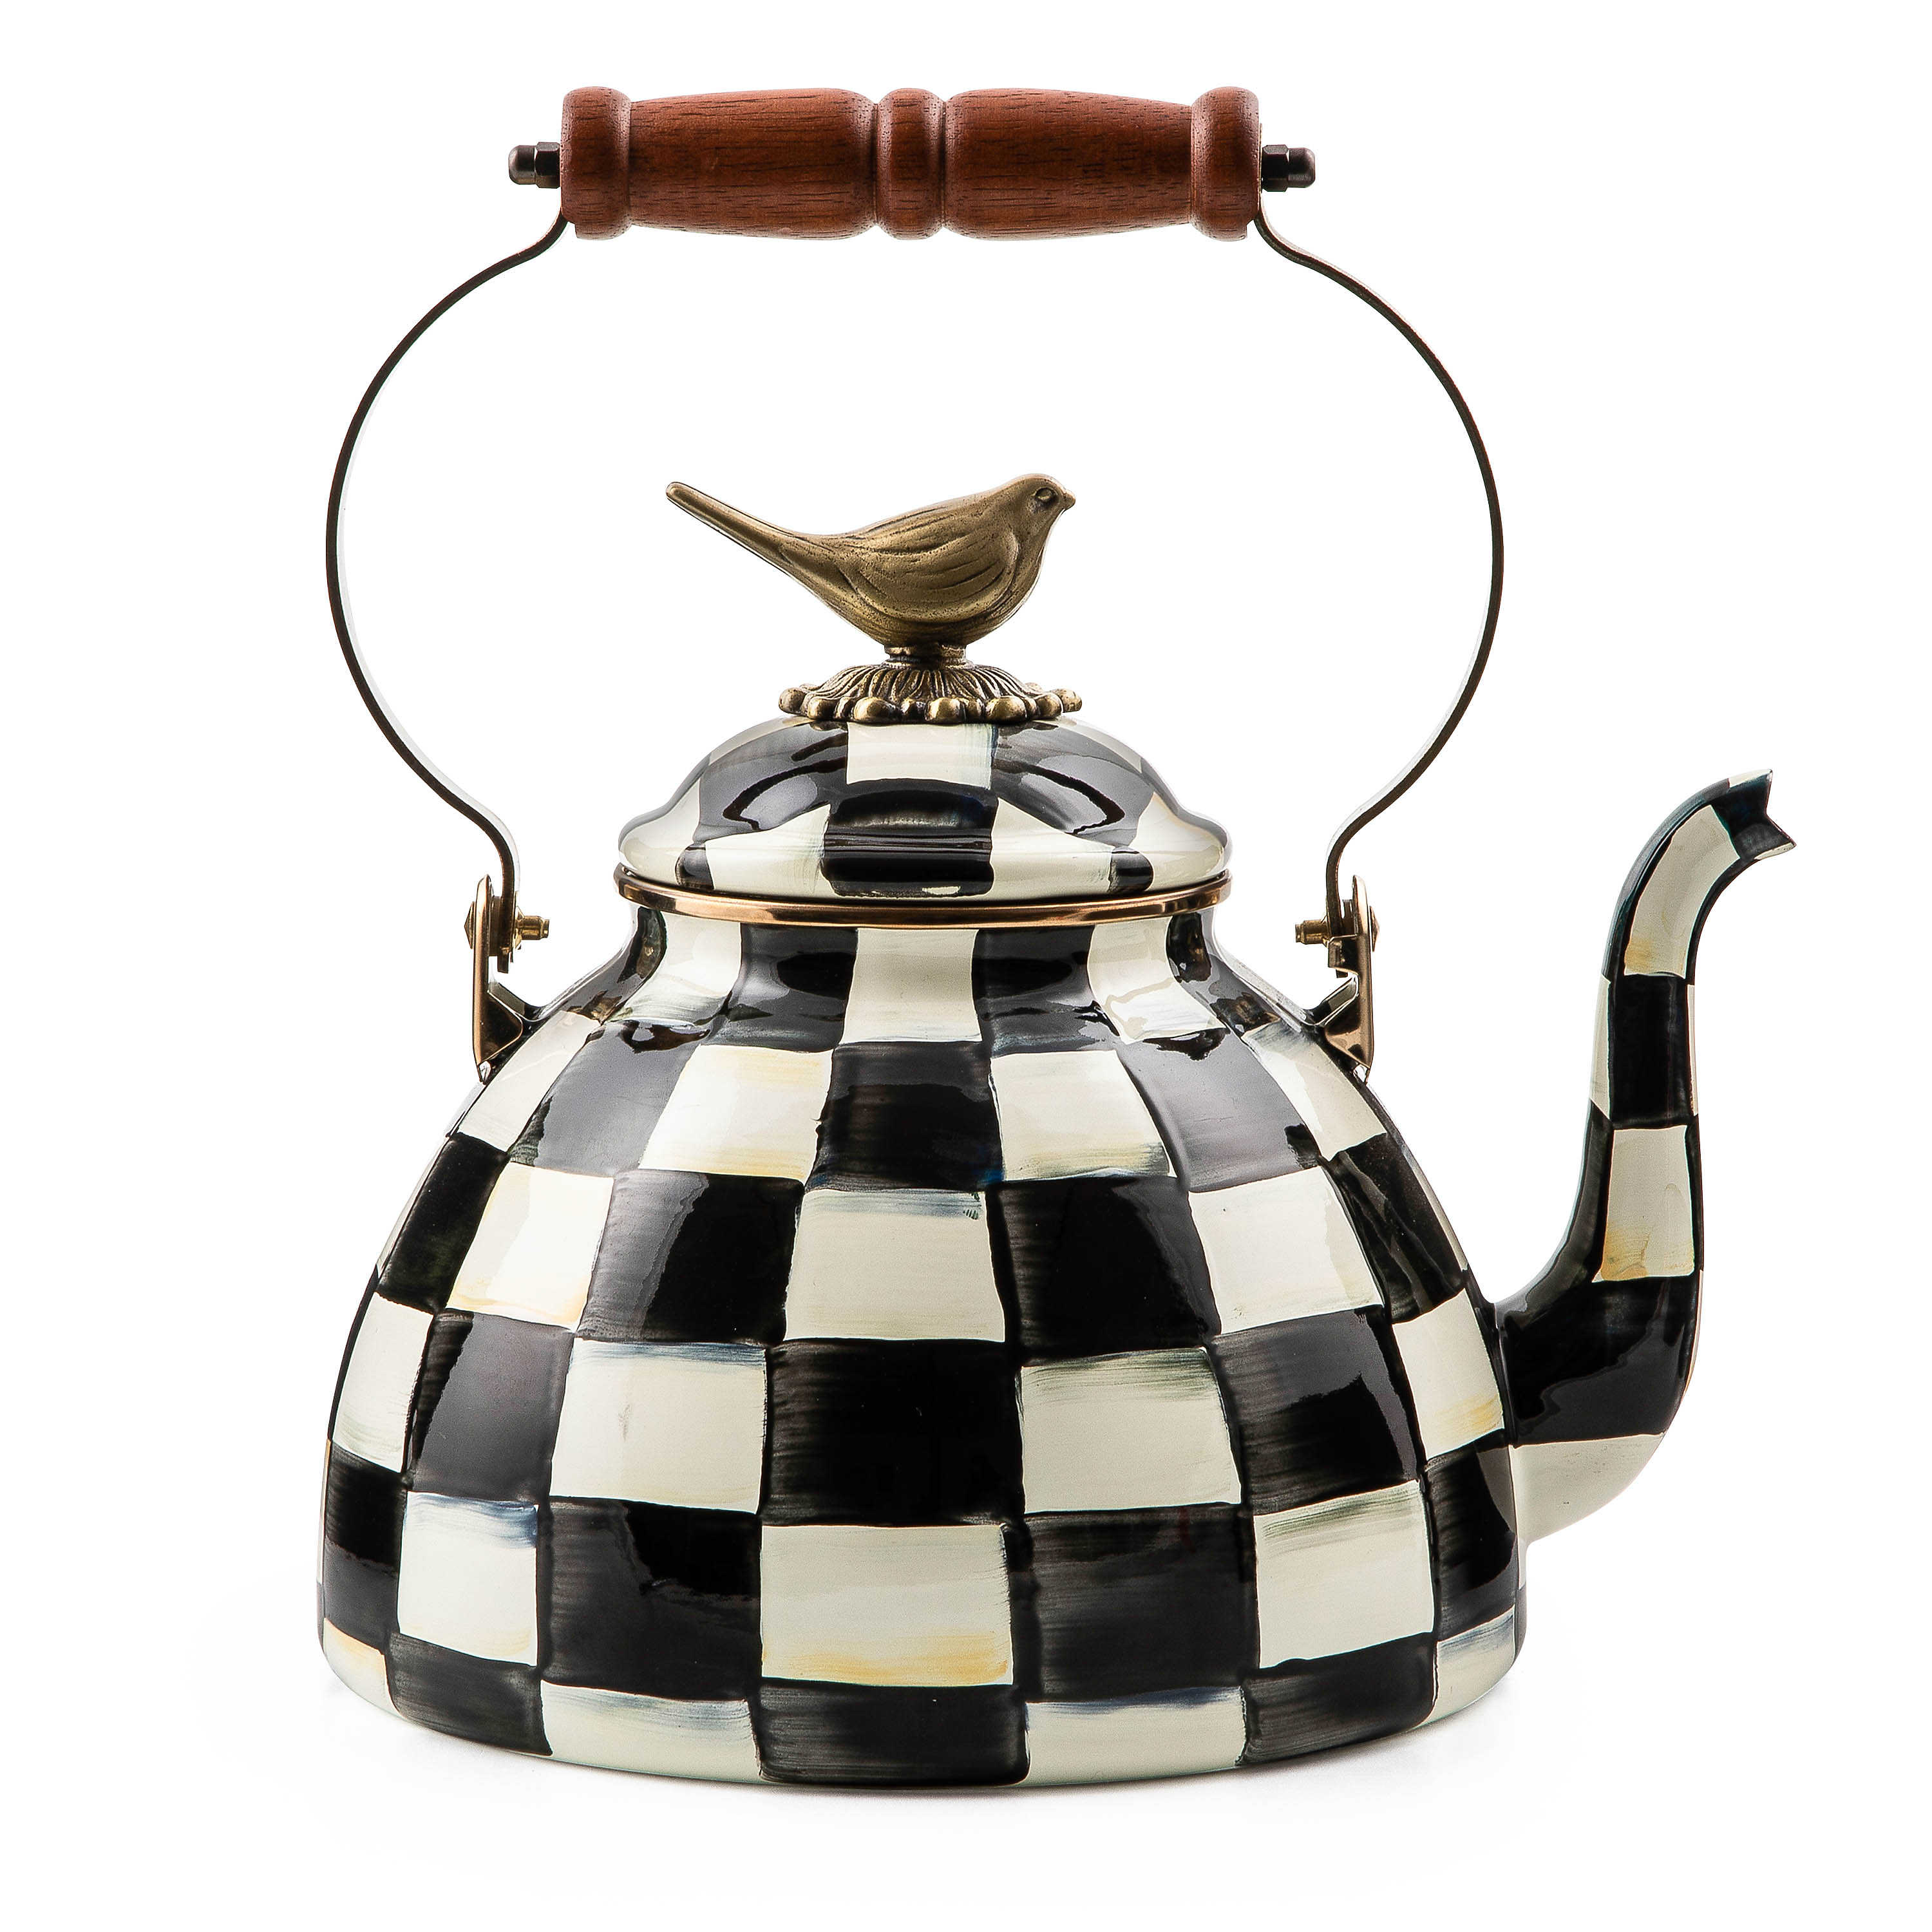 Courtly Check 3 Quart Tea Kettle with Bird mackenzie-childs Panama 0